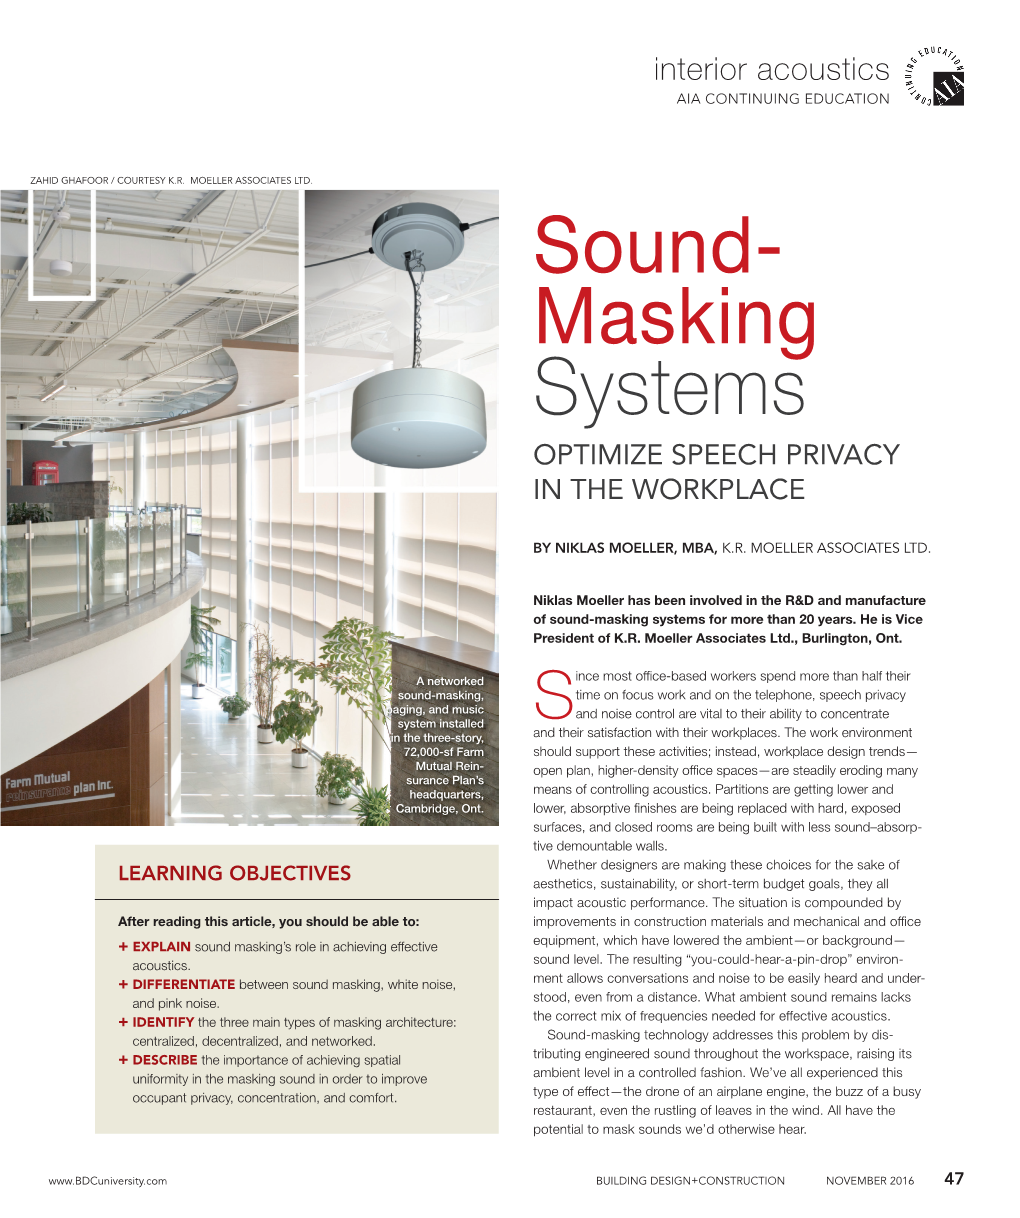 Sound- Masking Systems OPTIMIZE SPEECH PRIVACY in the WORKPLACE